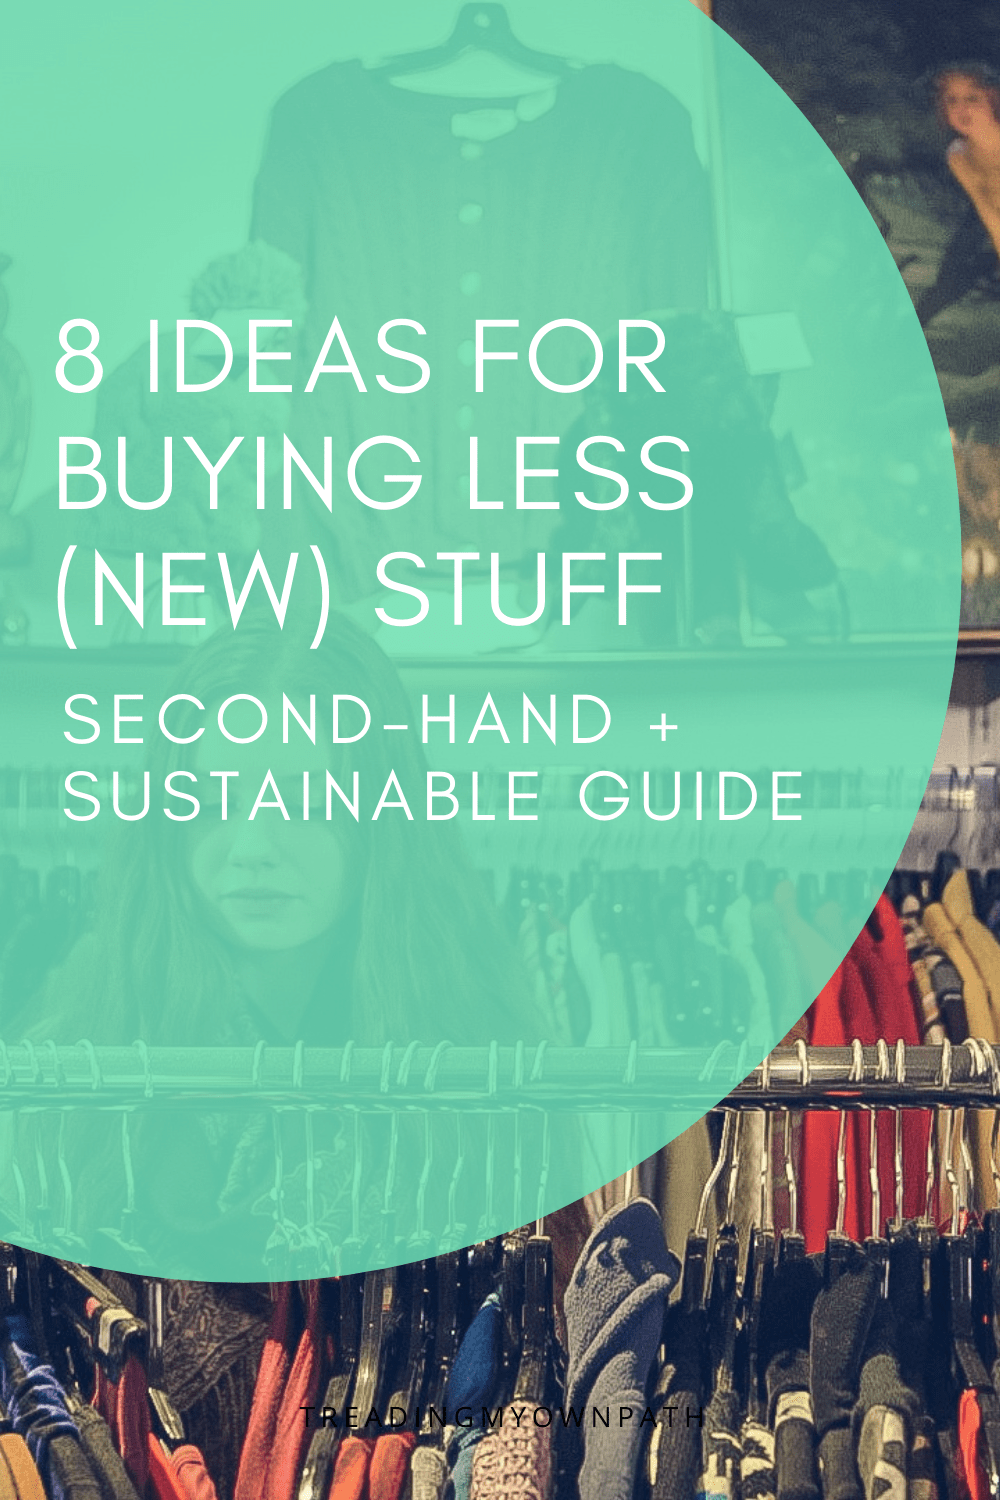 Second-Hand First: 8 Ideas for Buying Less (New) Stuff